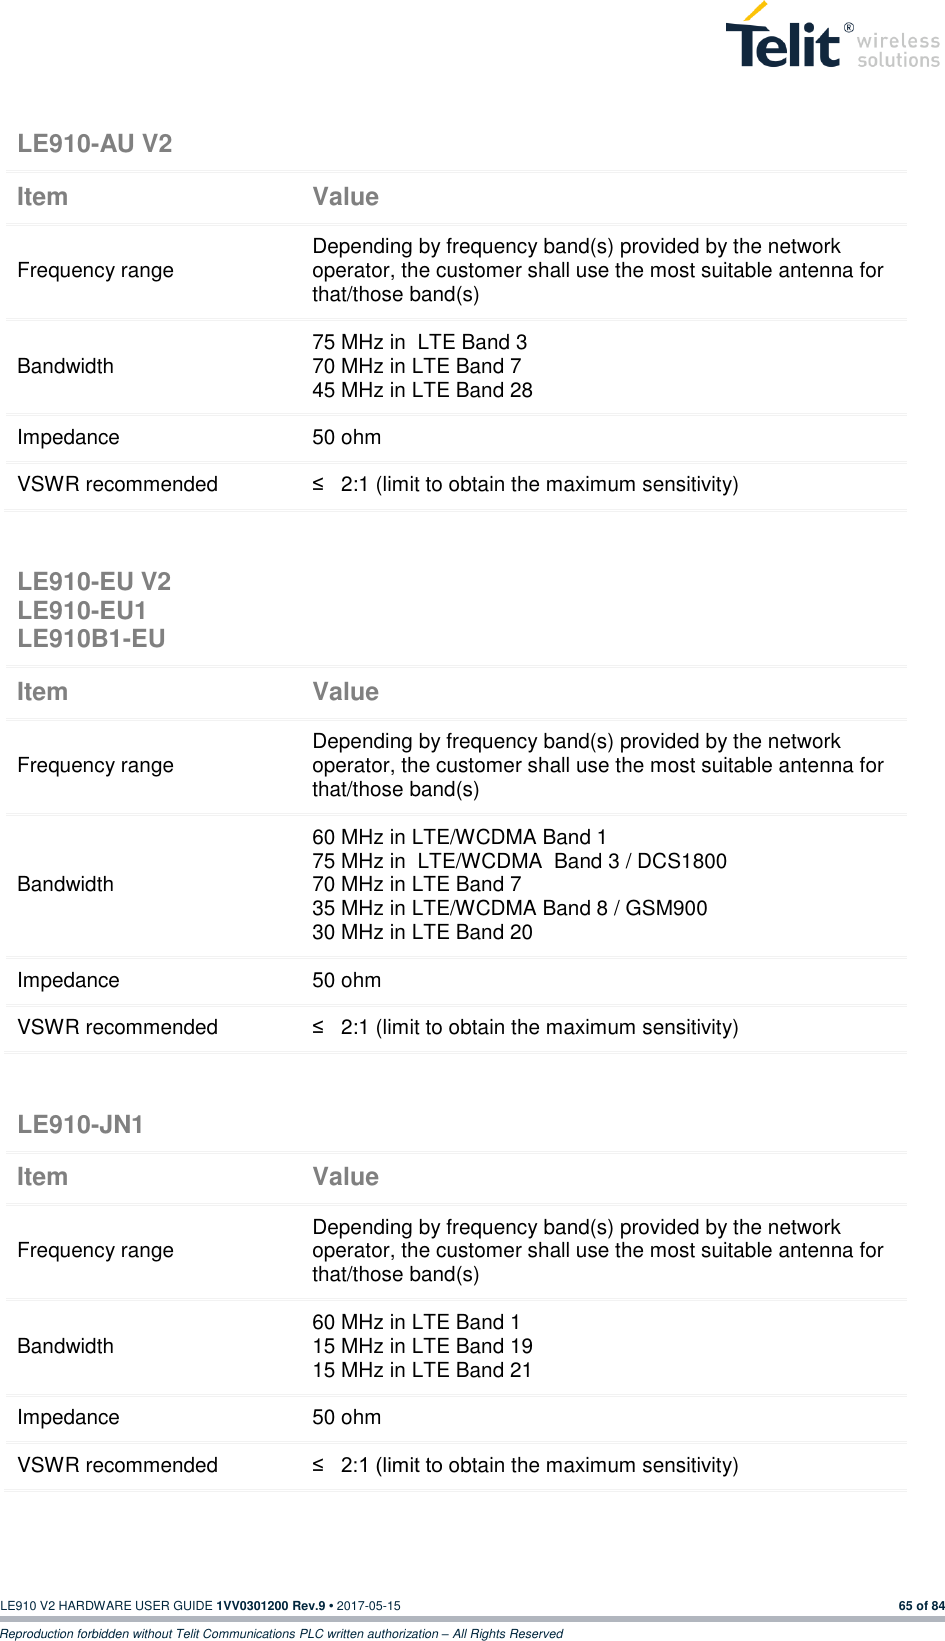   LE910 V2 HARDWARE USER GUIDE 1VV0301200 Rev.9 • 2017-05-15 65 of 84 Reproduction forbidden without Telit Communications PLC written authorization – All Rights Reserved      LE910-AU V2  Item Value Frequency range Depending by frequency band(s) provided by the network operator, the customer shall use the most suitable antenna for that/those band(s) Bandwidth 75 MHz in  LTE Band 3 70 MHz in LTE Band 7 45 MHz in LTE Band 28 Impedance 50 ohm VSWR recommended ≤   2:1 (limit to obtain the maximum sensitivity) LE910-EU V2 LE910-EU1 LE910B1-EU  Item Value Frequency range Depending by frequency band(s) provided by the network operator, the customer shall use the most suitable antenna for that/those band(s) Bandwidth 60 MHz in LTE/WCDMA Band 1 75 MHz in  LTE/WCDMA  Band 3 / DCS1800 70 MHz in LTE Band 7 35 MHz in LTE/WCDMA Band 8 / GSM900 30 MHz in LTE Band 20 Impedance 50 ohm VSWR recommended ≤   2:1 (limit to obtain the maximum sensitivity) LE910-JN1  Item Value Frequency range Depending by frequency band(s) provided by the network operator, the customer shall use the most suitable antenna for that/those band(s) Bandwidth 60 MHz in LTE Band 1 15 MHz in LTE Band 19 15 MHz in LTE Band 21 Impedance 50 ohm VSWR recommended ≤   2:1 (limit to obtain the maximum sensitivity) 